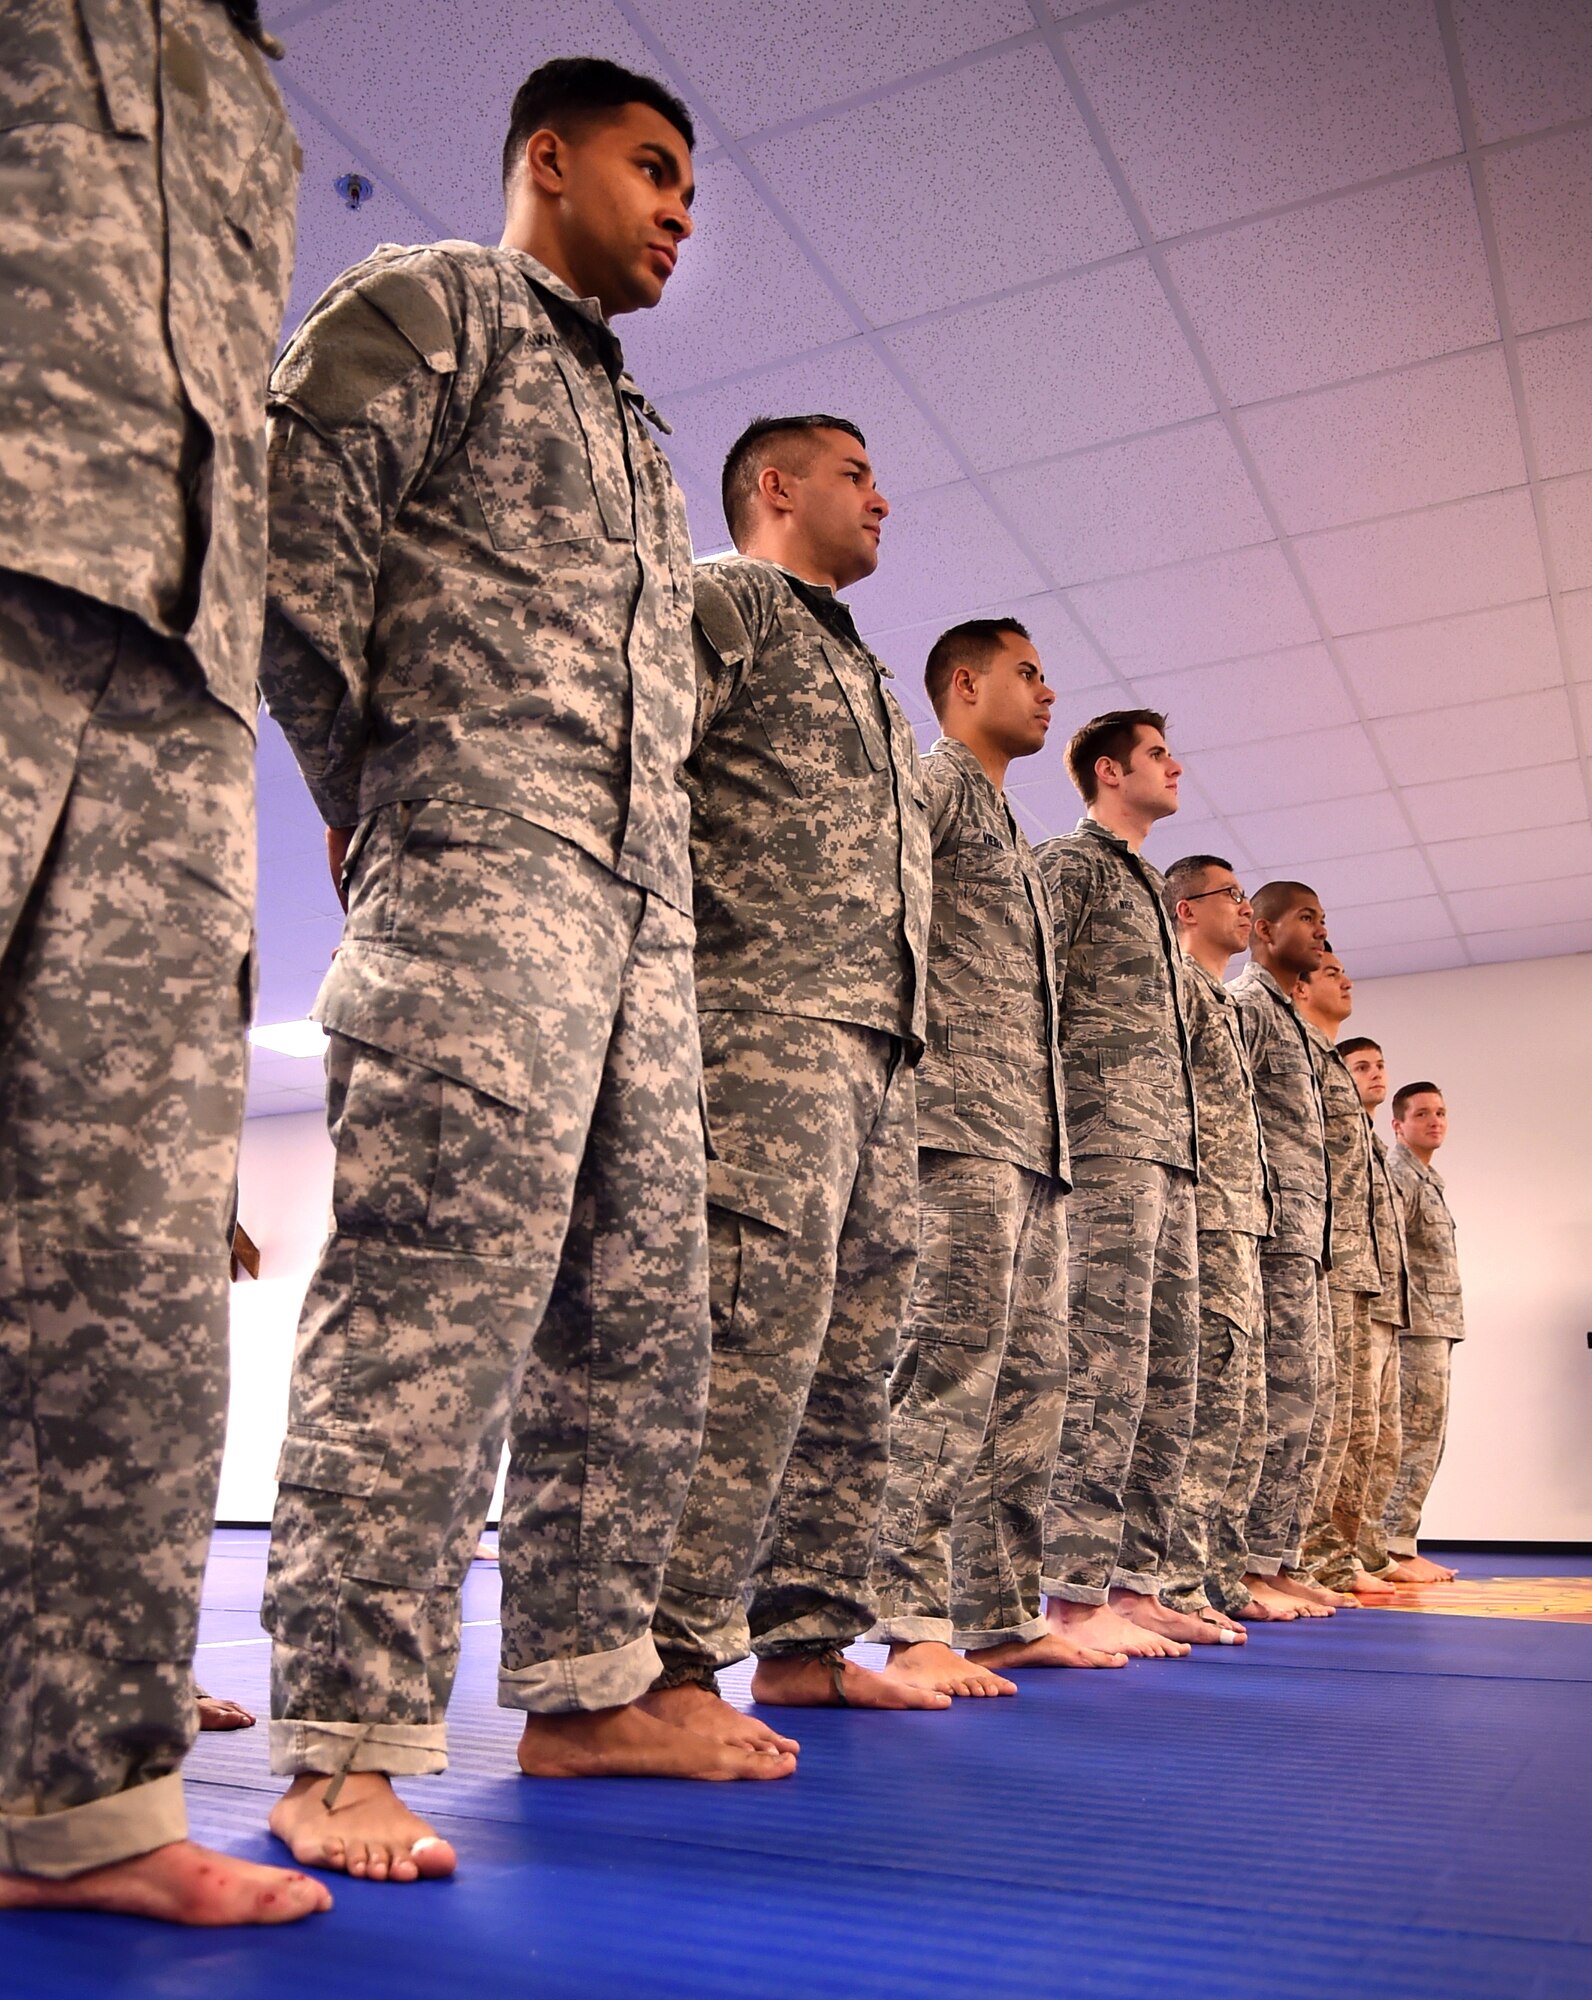 Students line up to practice for graduation during the Basic Combatives Course at Fort Belvoir, Jan. 8, 2016. The course produces well-rounded, skilled and more confident service members with approximately 10 students participating in the course at a time and 12 classes graduating per year. (U.S. Air Force photo by Senior Airman Mariah Haddenham/Released)

